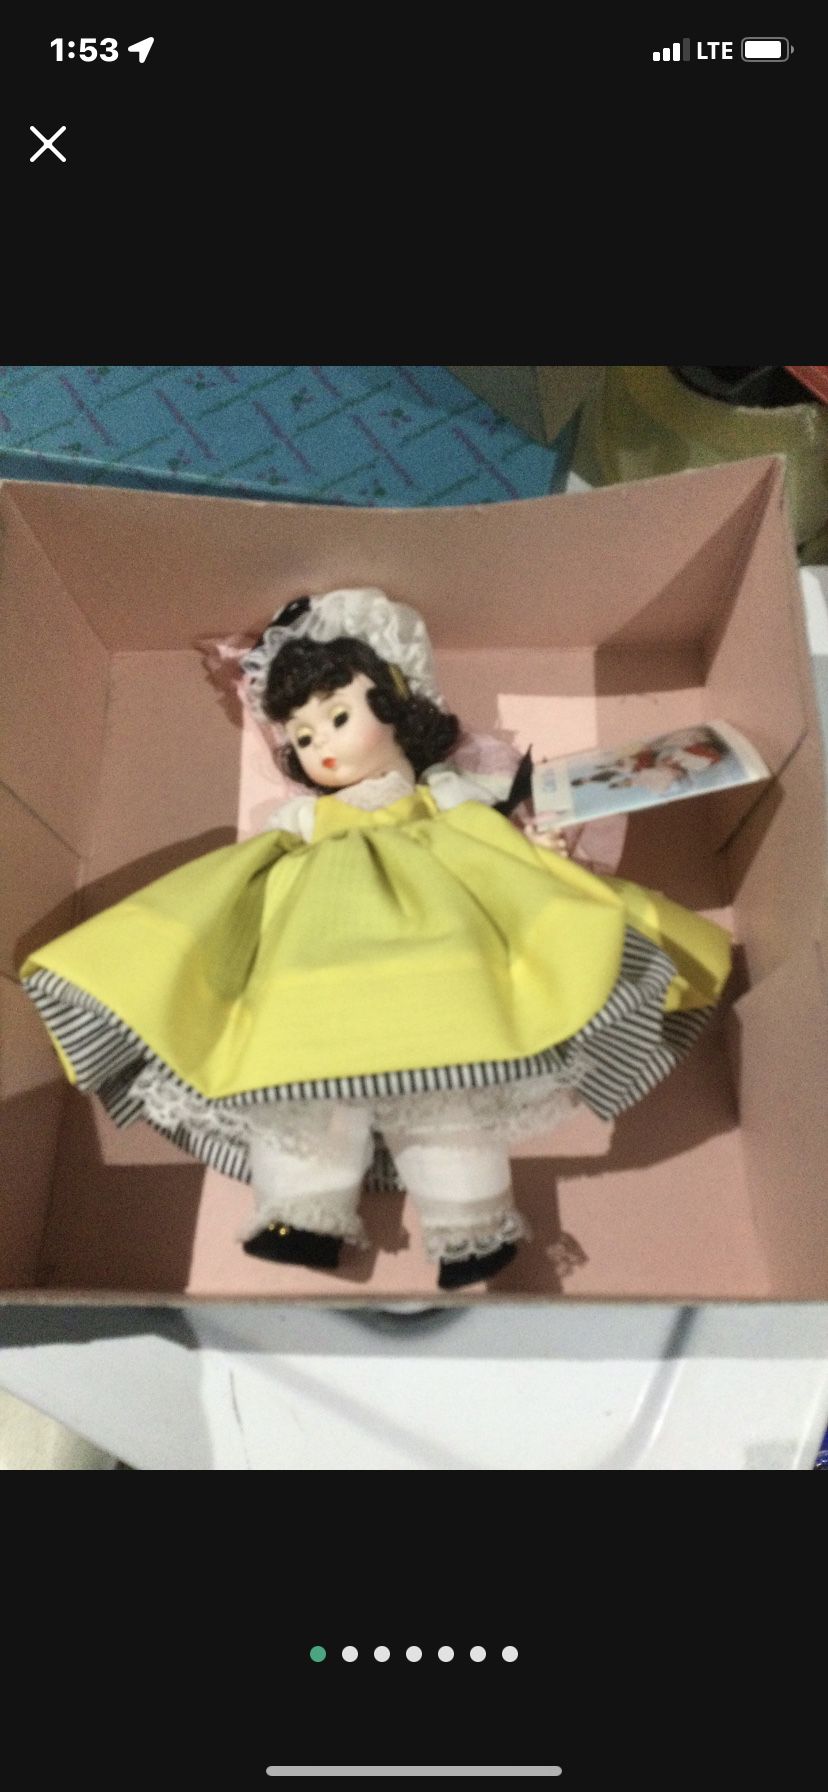 Madame  Alexander Collectible Doll France And Belgium